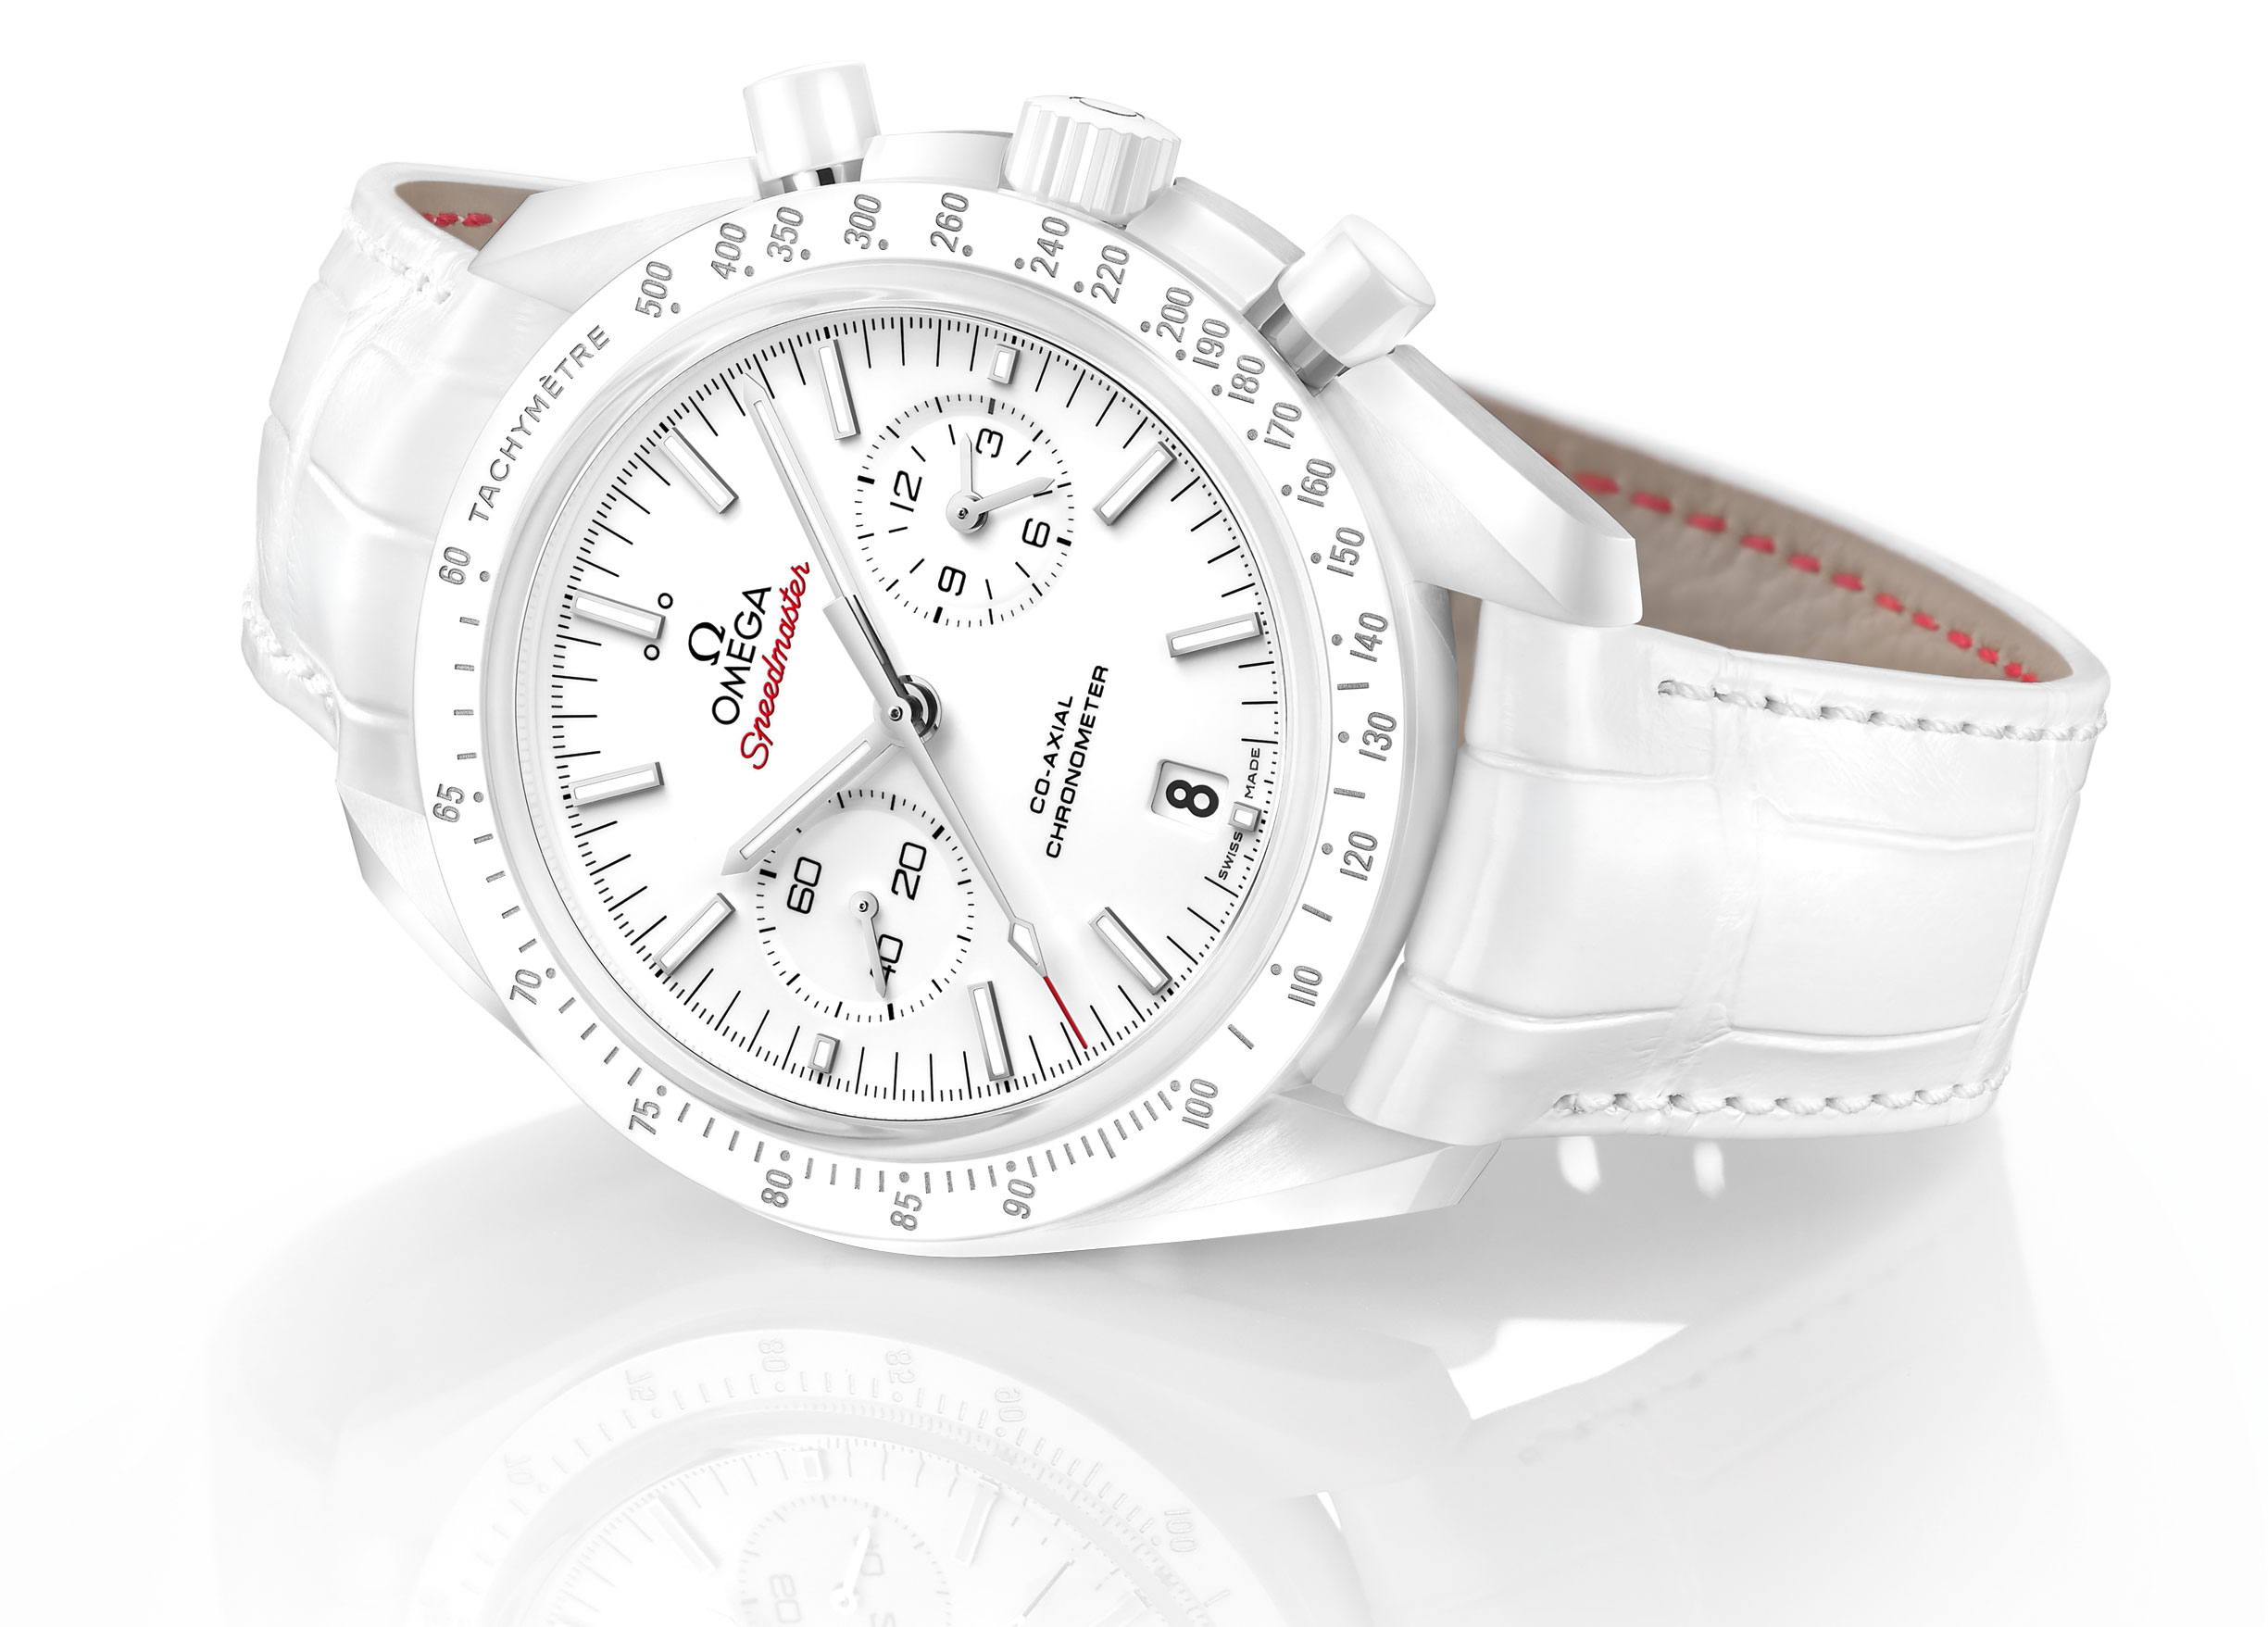 The Ceramic Speedmaster 9300 Models – An Overview